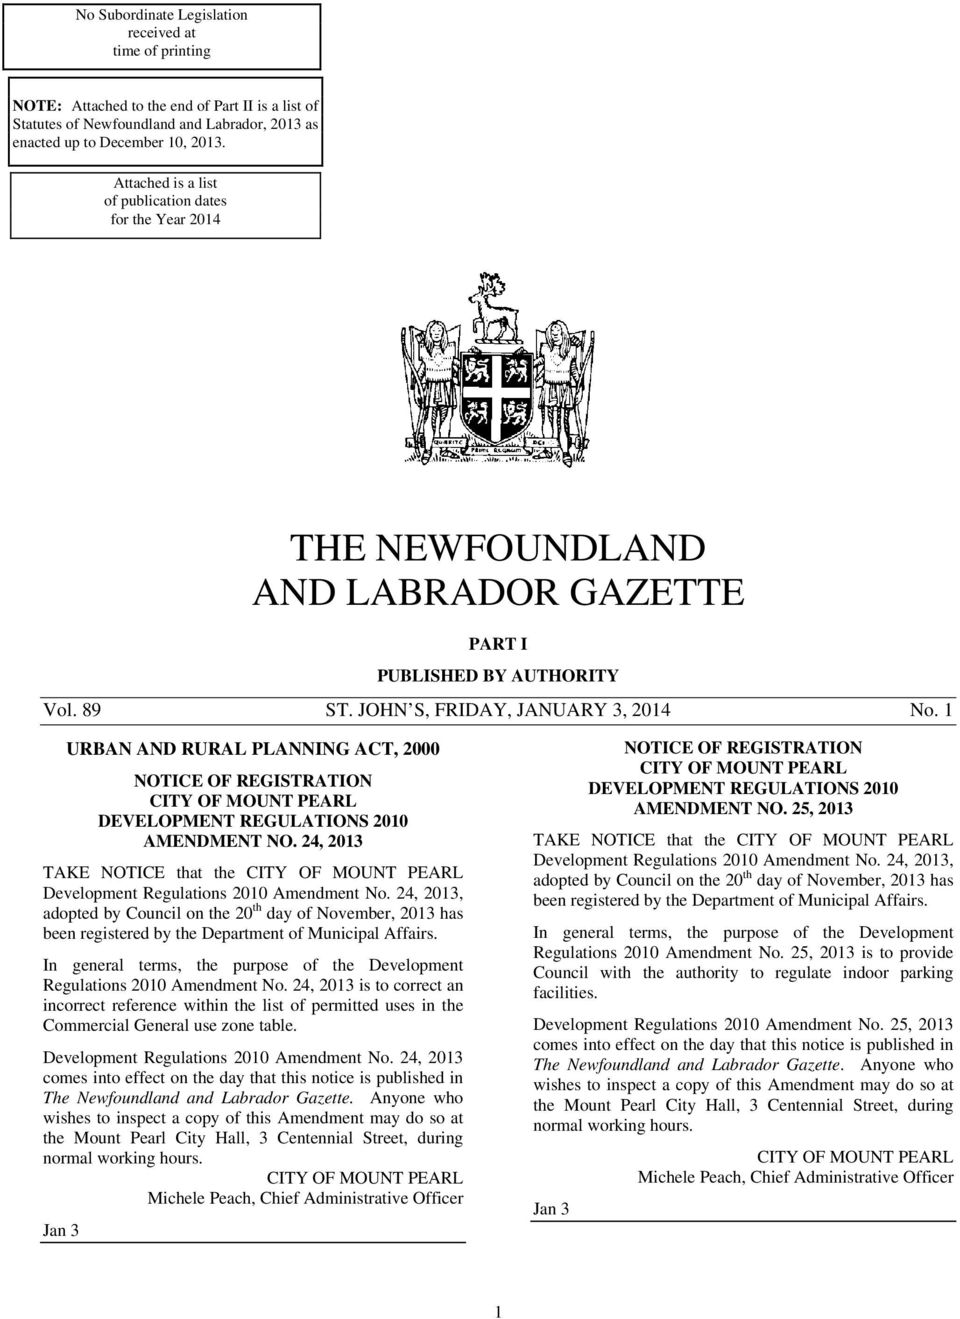 1 URBAN AND RURAL PLANNING ACT, 2000 NOTICE OF REGISTRATION CITY OF MOUNT PEARL DEVELOPMENT REGULATIONS 2010 AMENDMENT NO.